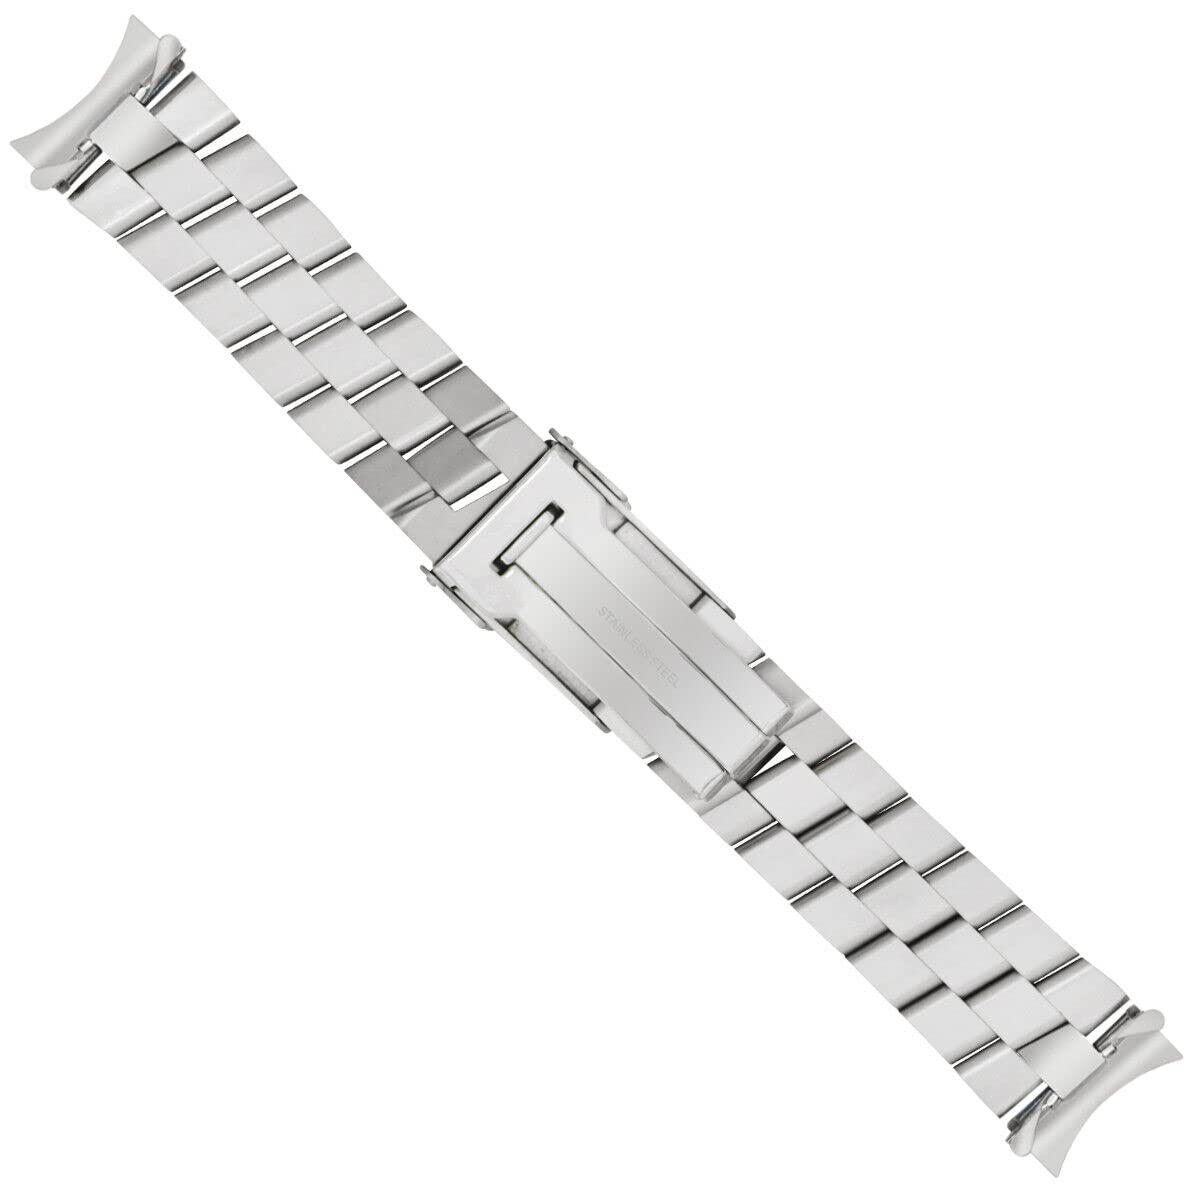 22mm Watch Band Bracelet Compatible with Breitling 'Old Colt B1/B2 Fighter Watch Polish